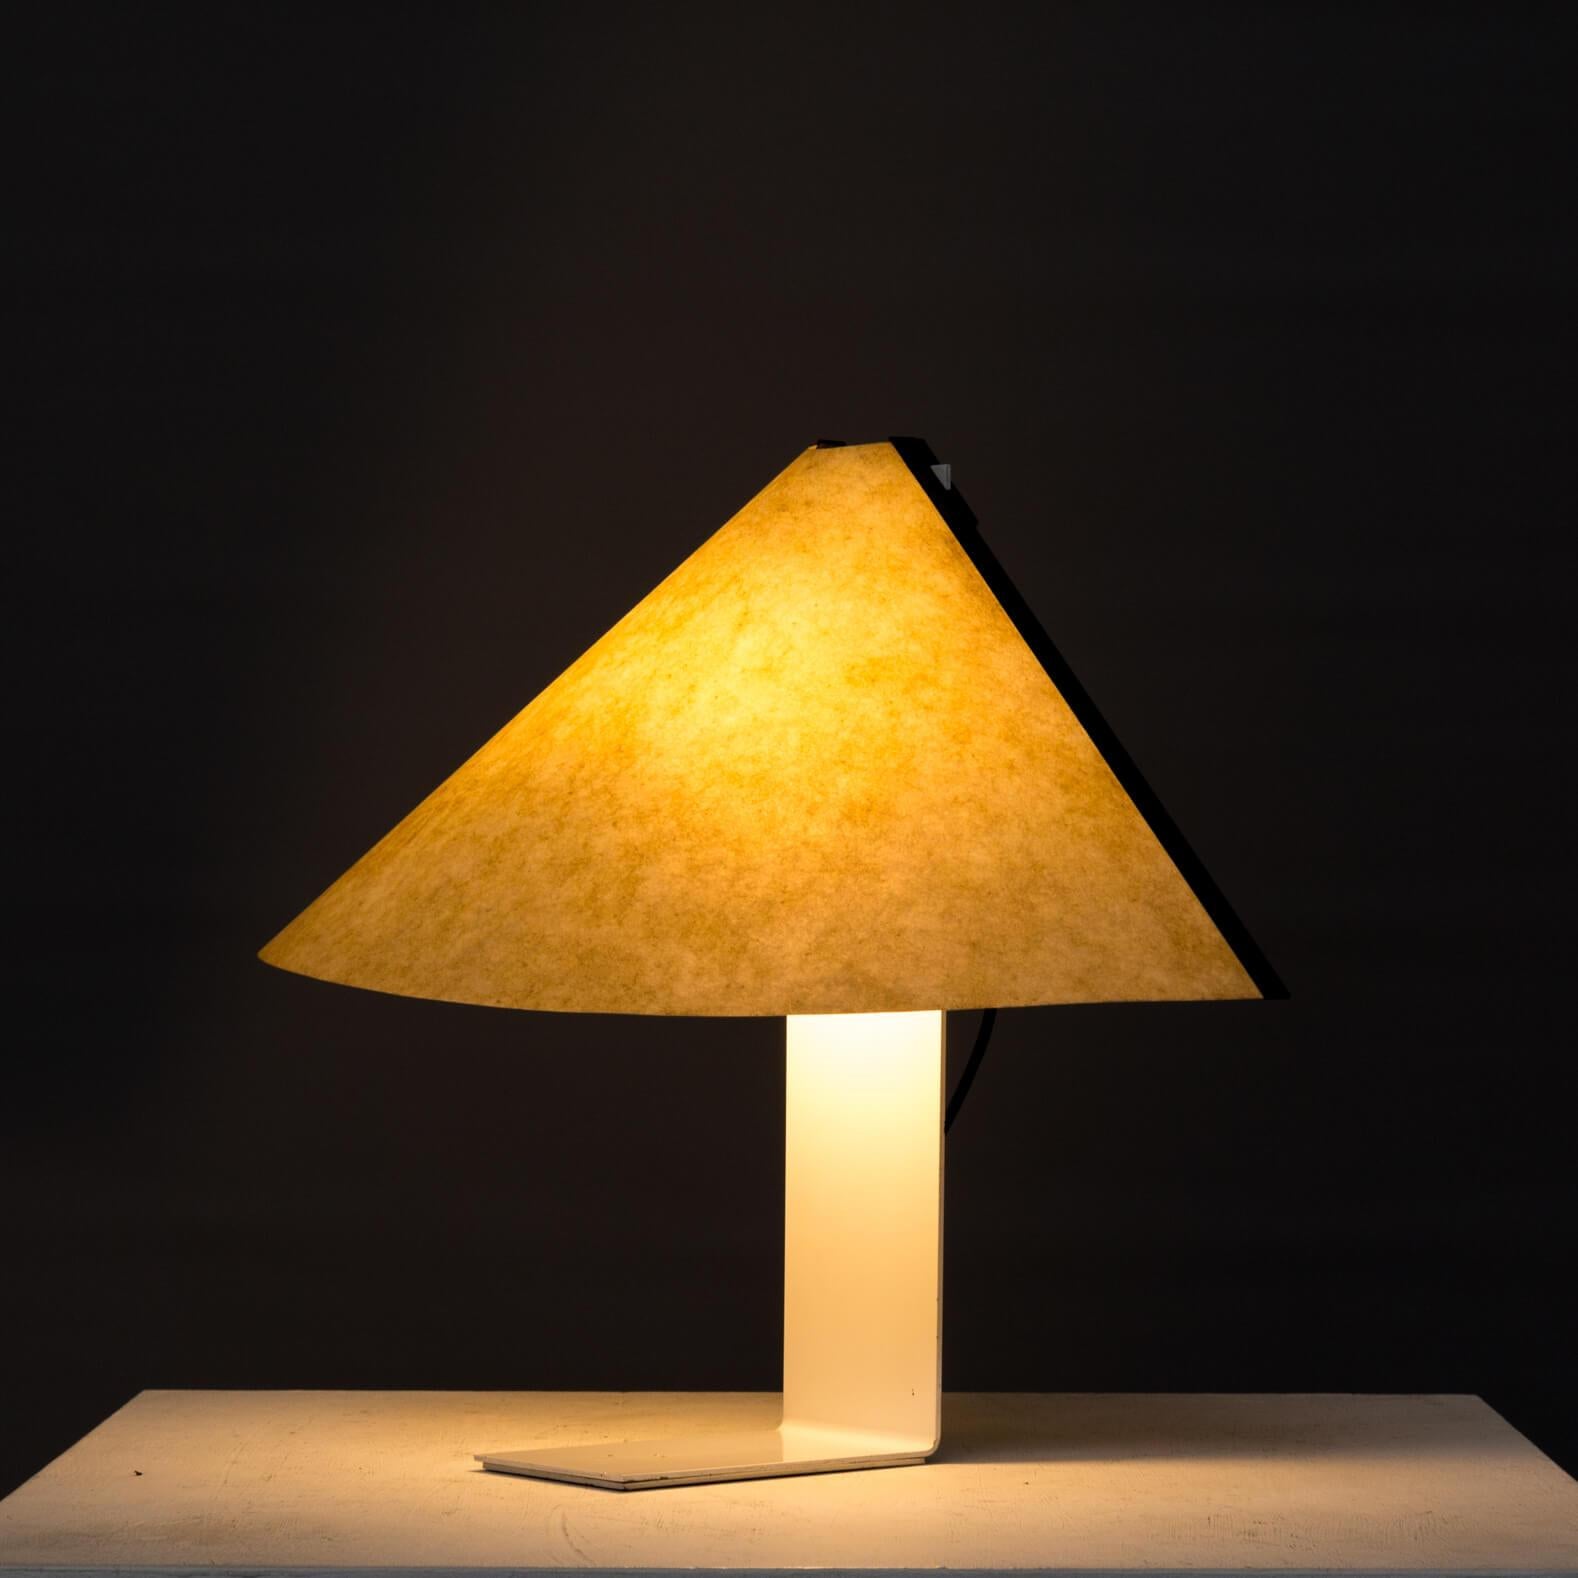 This artemide table lamp shows the experimental use of paper hooding just because Magistretti was inspired by the light fall behind papier. Lamp is in good and working condition.